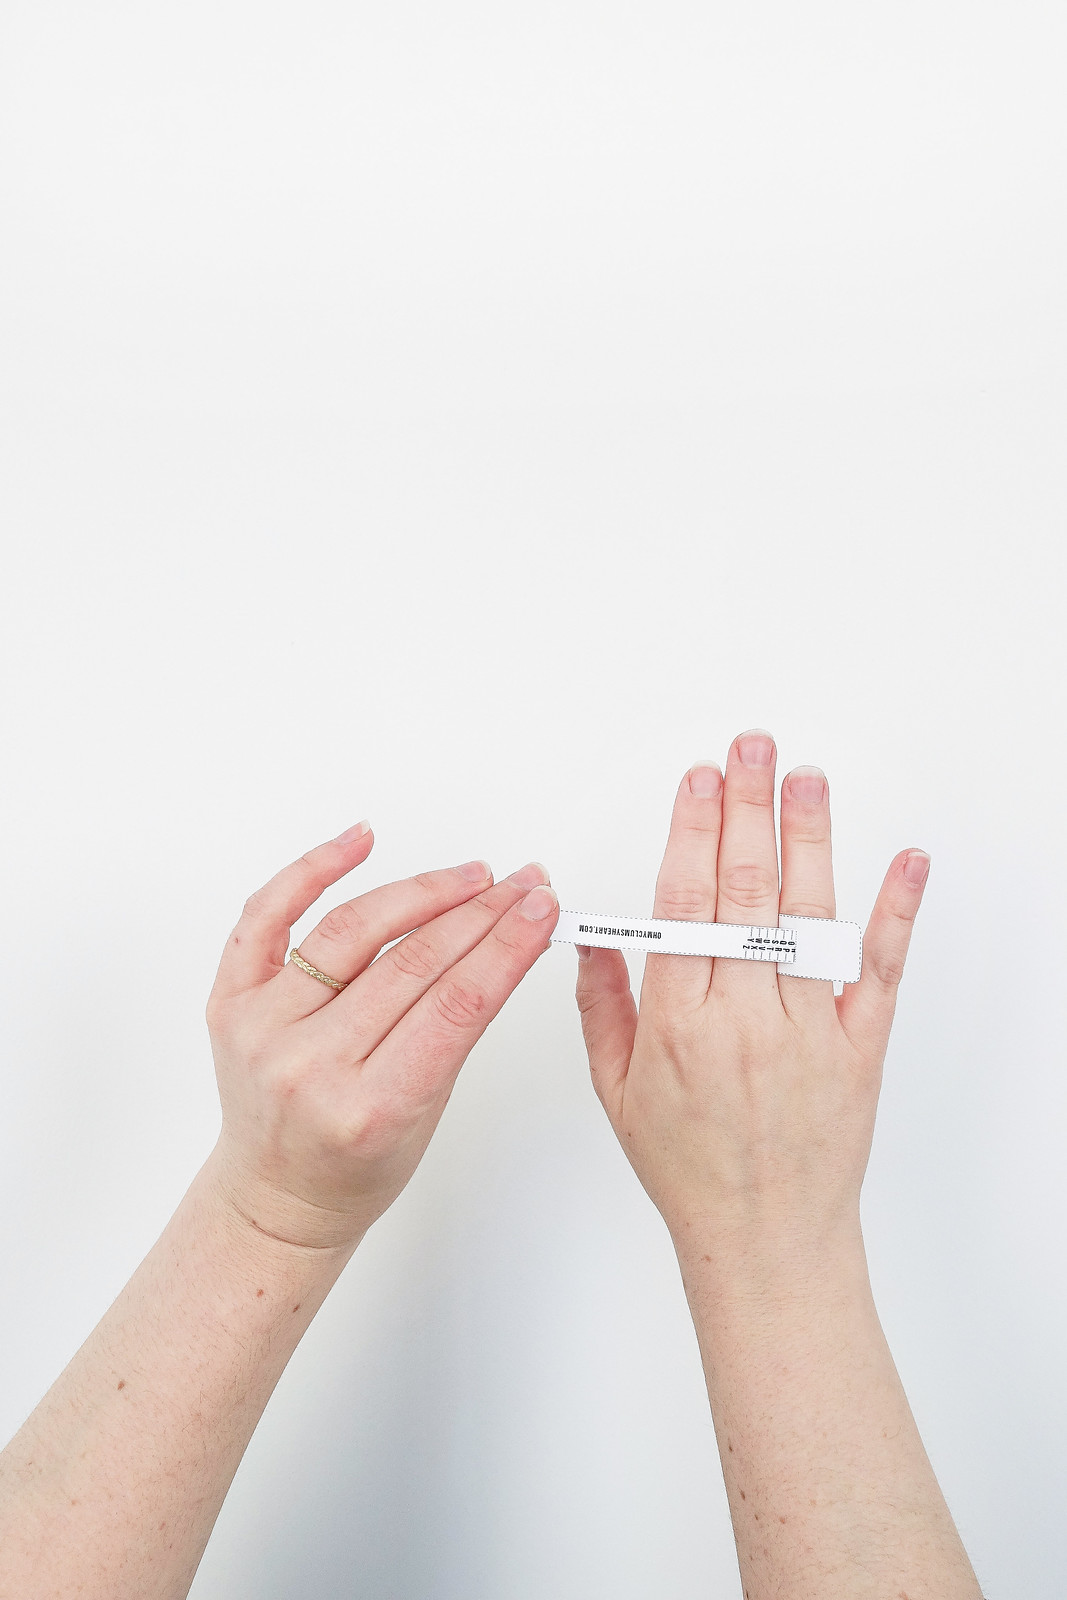 A Beginner's Guide To Minimal Jewellery